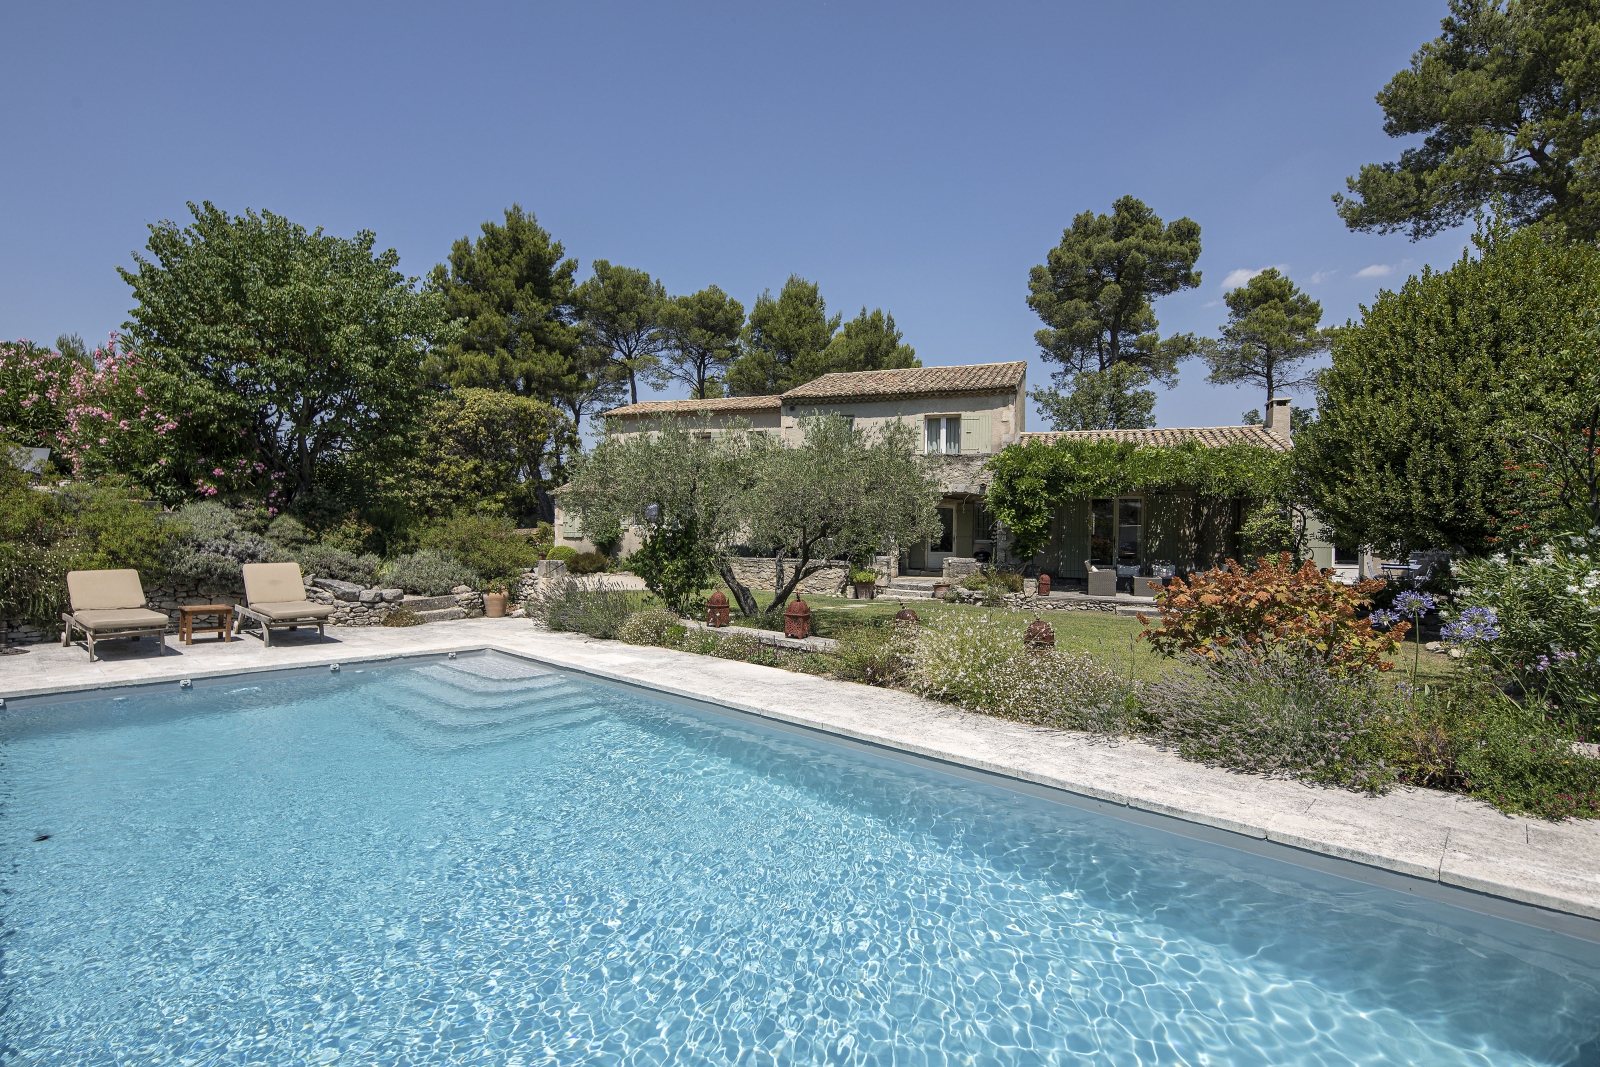 Pool, sun loungers, villa and garden with plants, flowers and trees at Mas Cecile in Provence, France